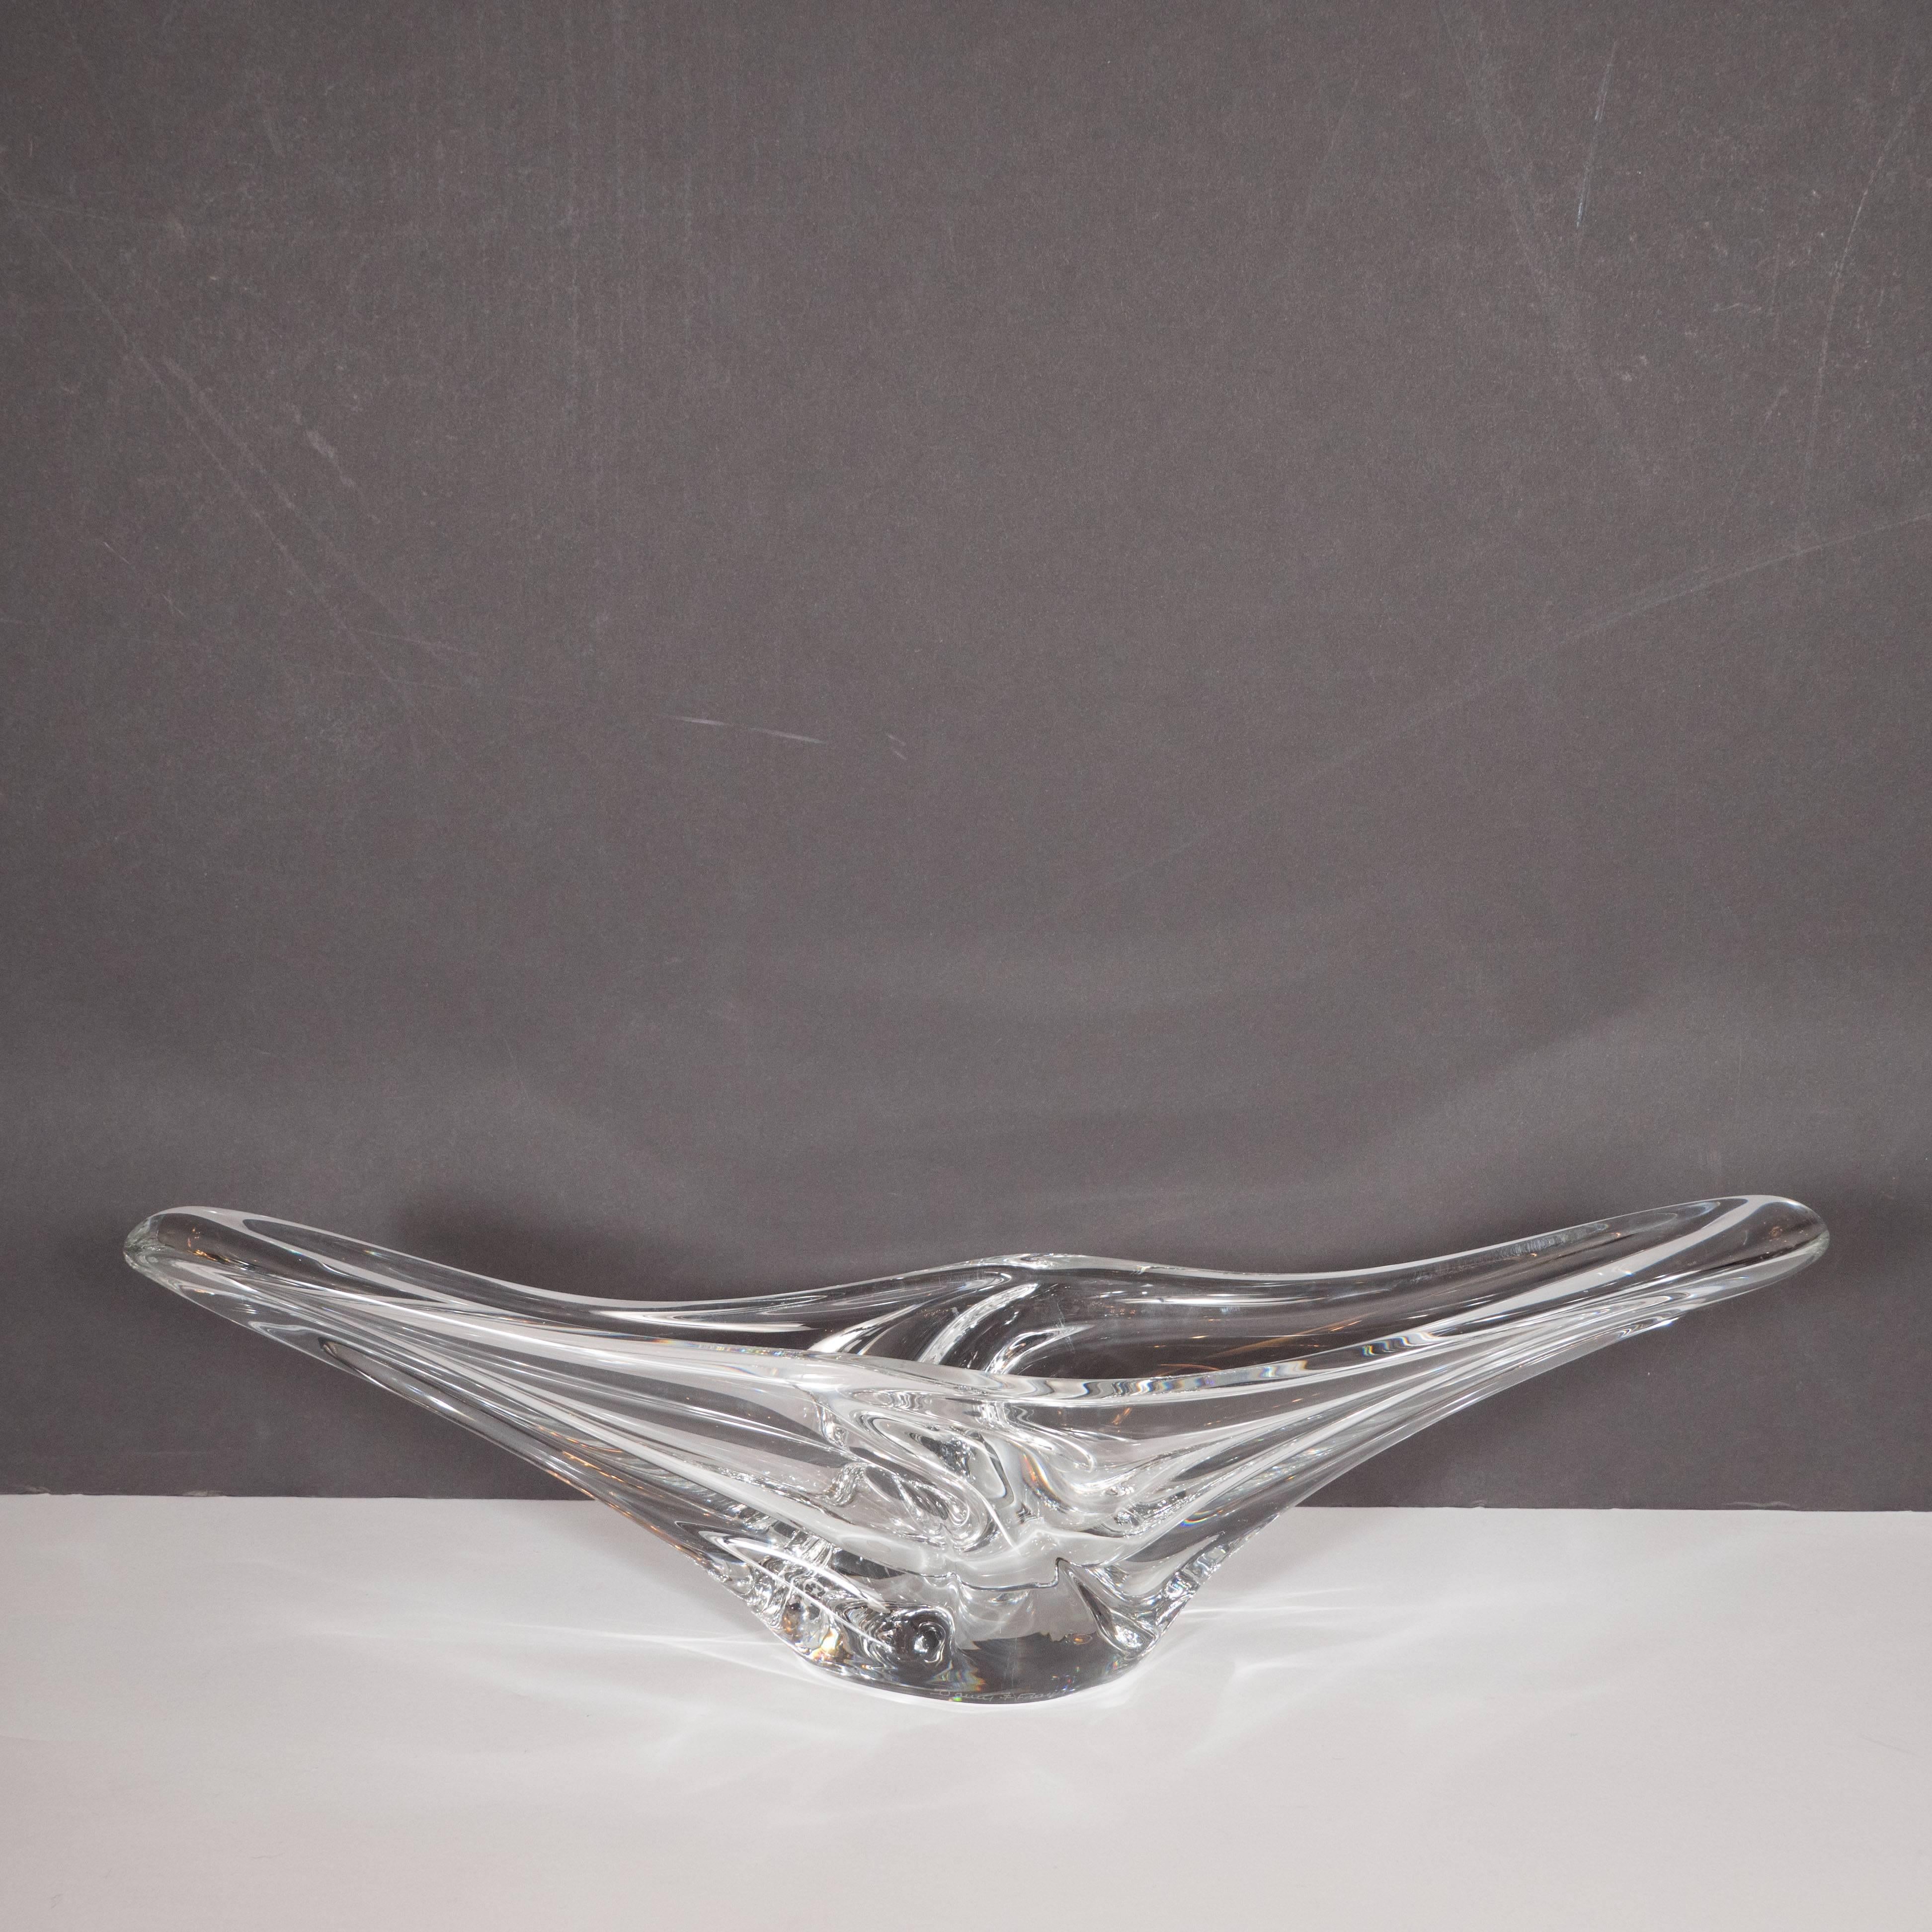 Mid-Century Modern Sculptural and Curvilinear Midcentury Translucent Glass Bowl by Daum, France For Sale